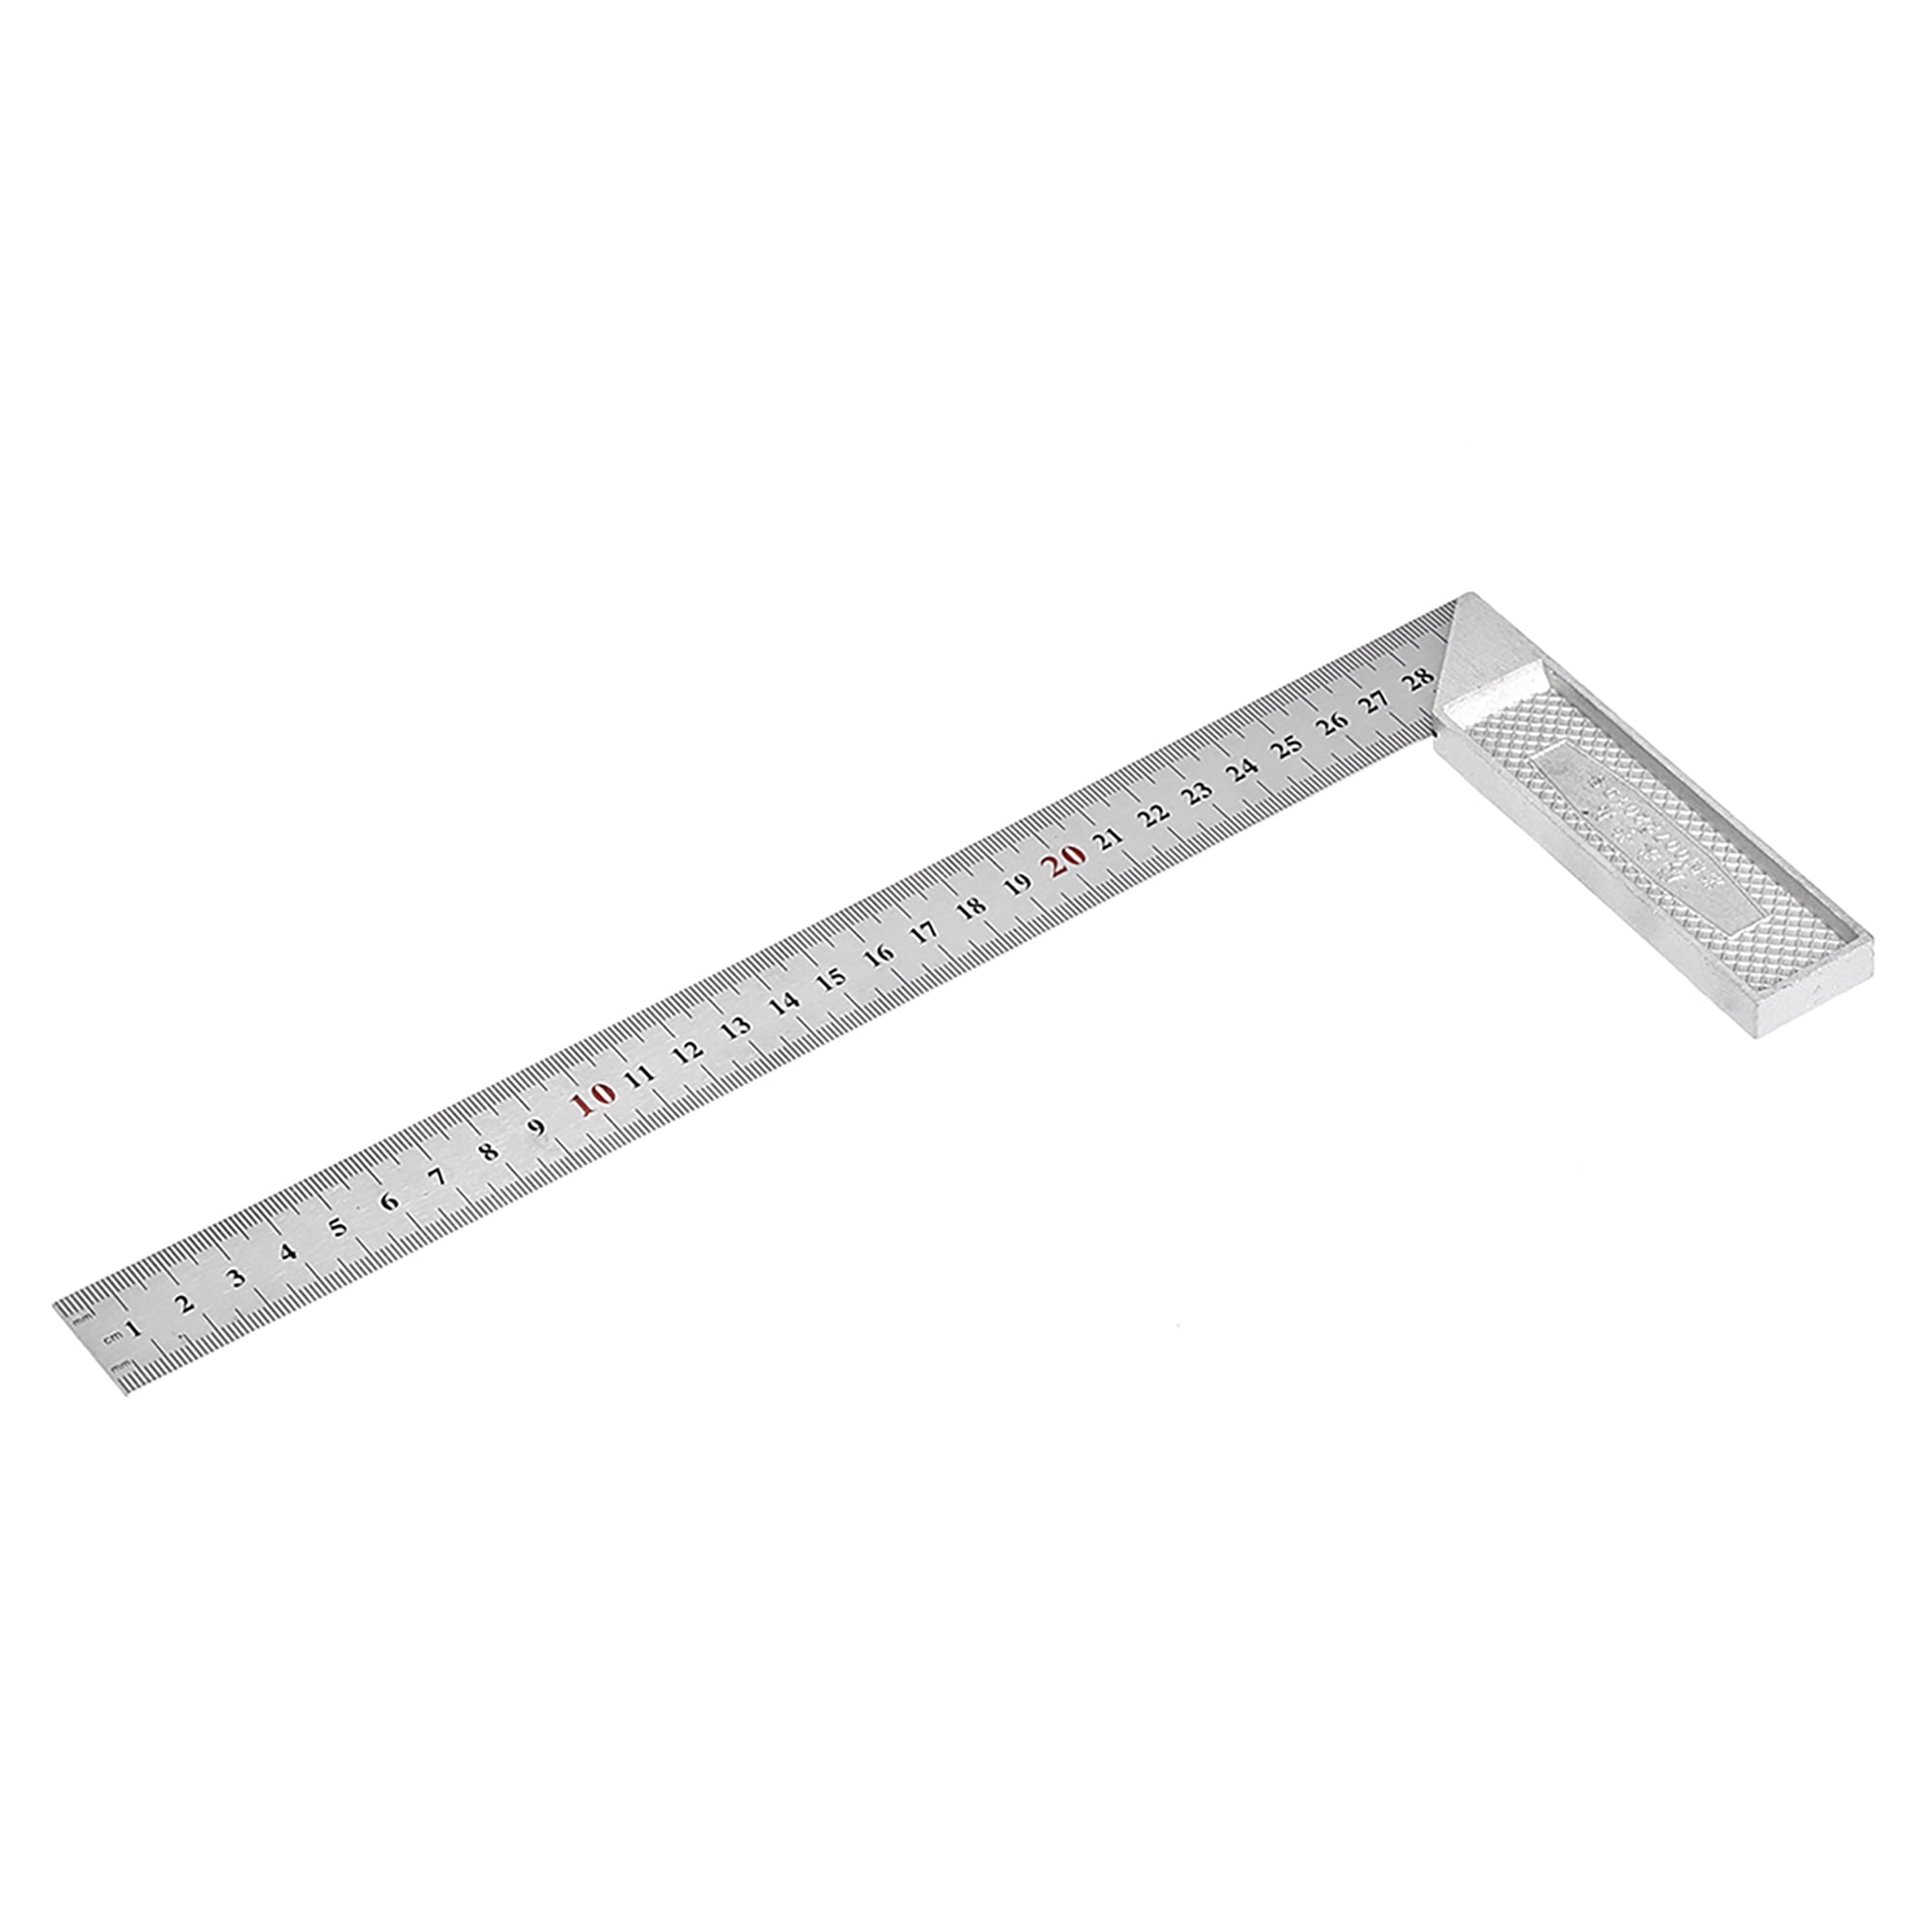 Buy Machinist Precision Edge Square Ruler 90 Right Angle Ruler Engineer  Measuring Tool by Just Green Tech on Dot & Bo